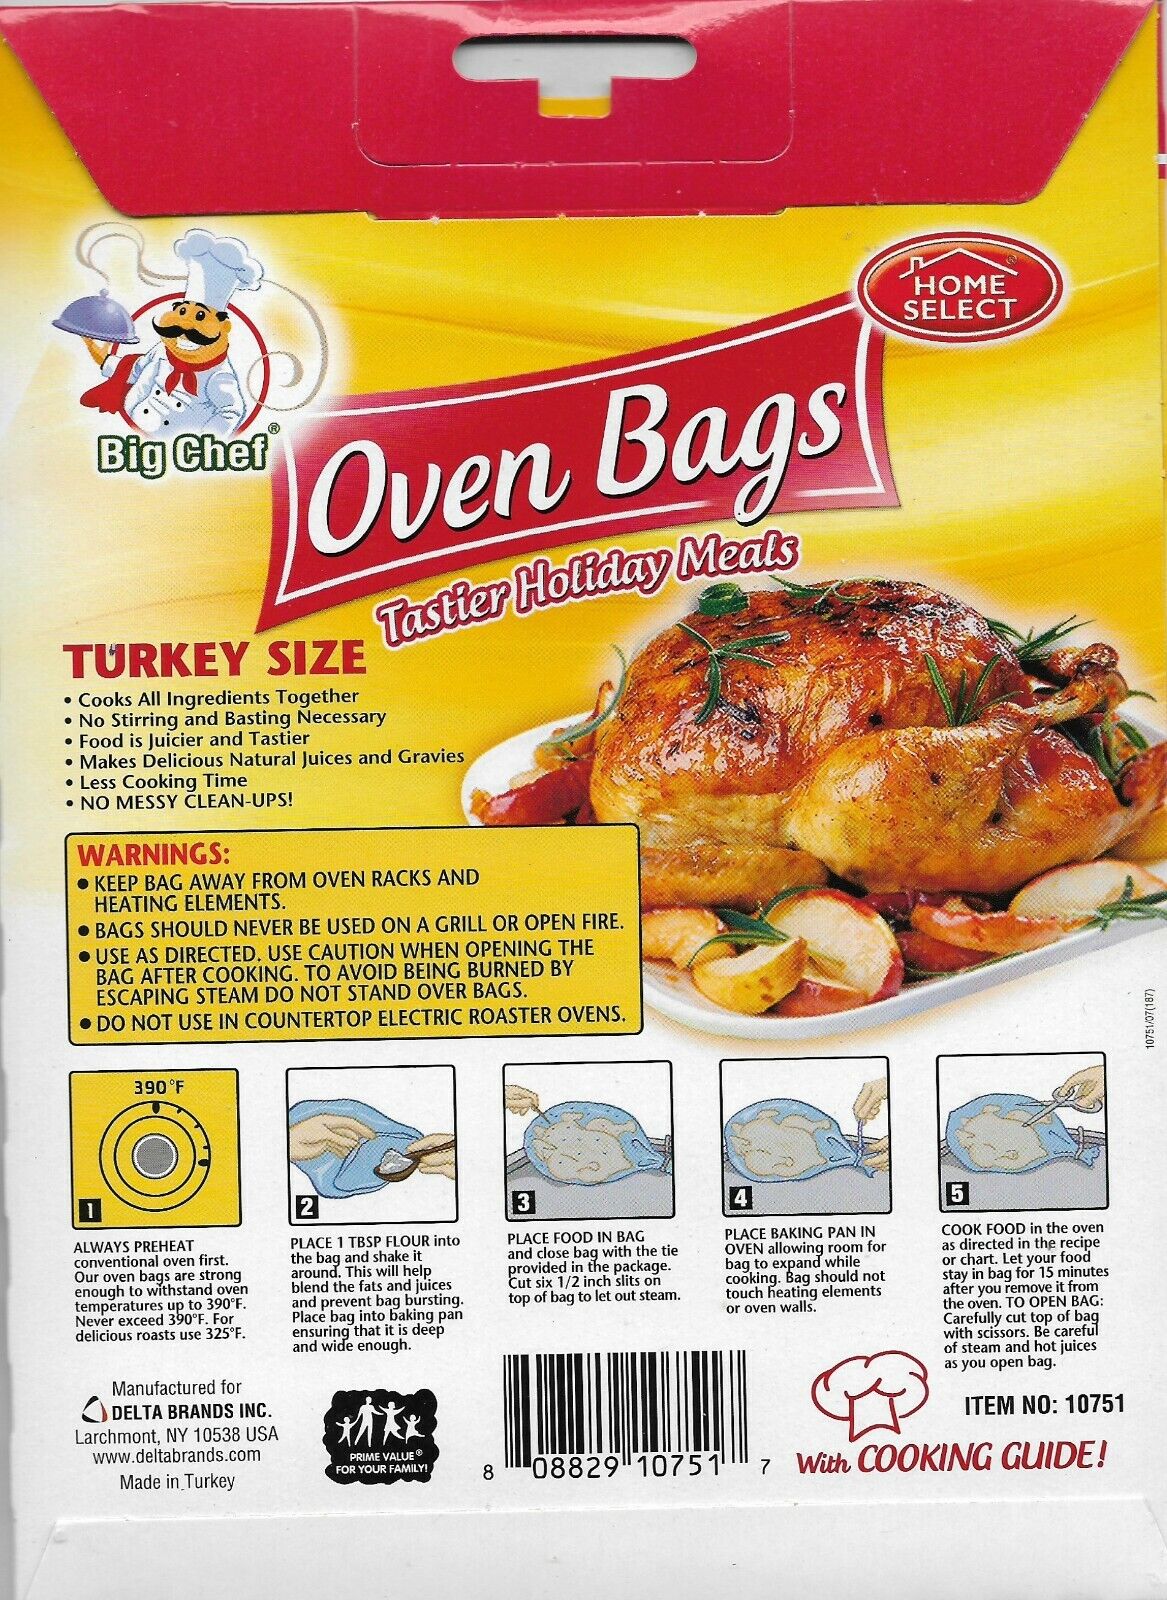 Oven Bags Turkey Size (2 Packs)